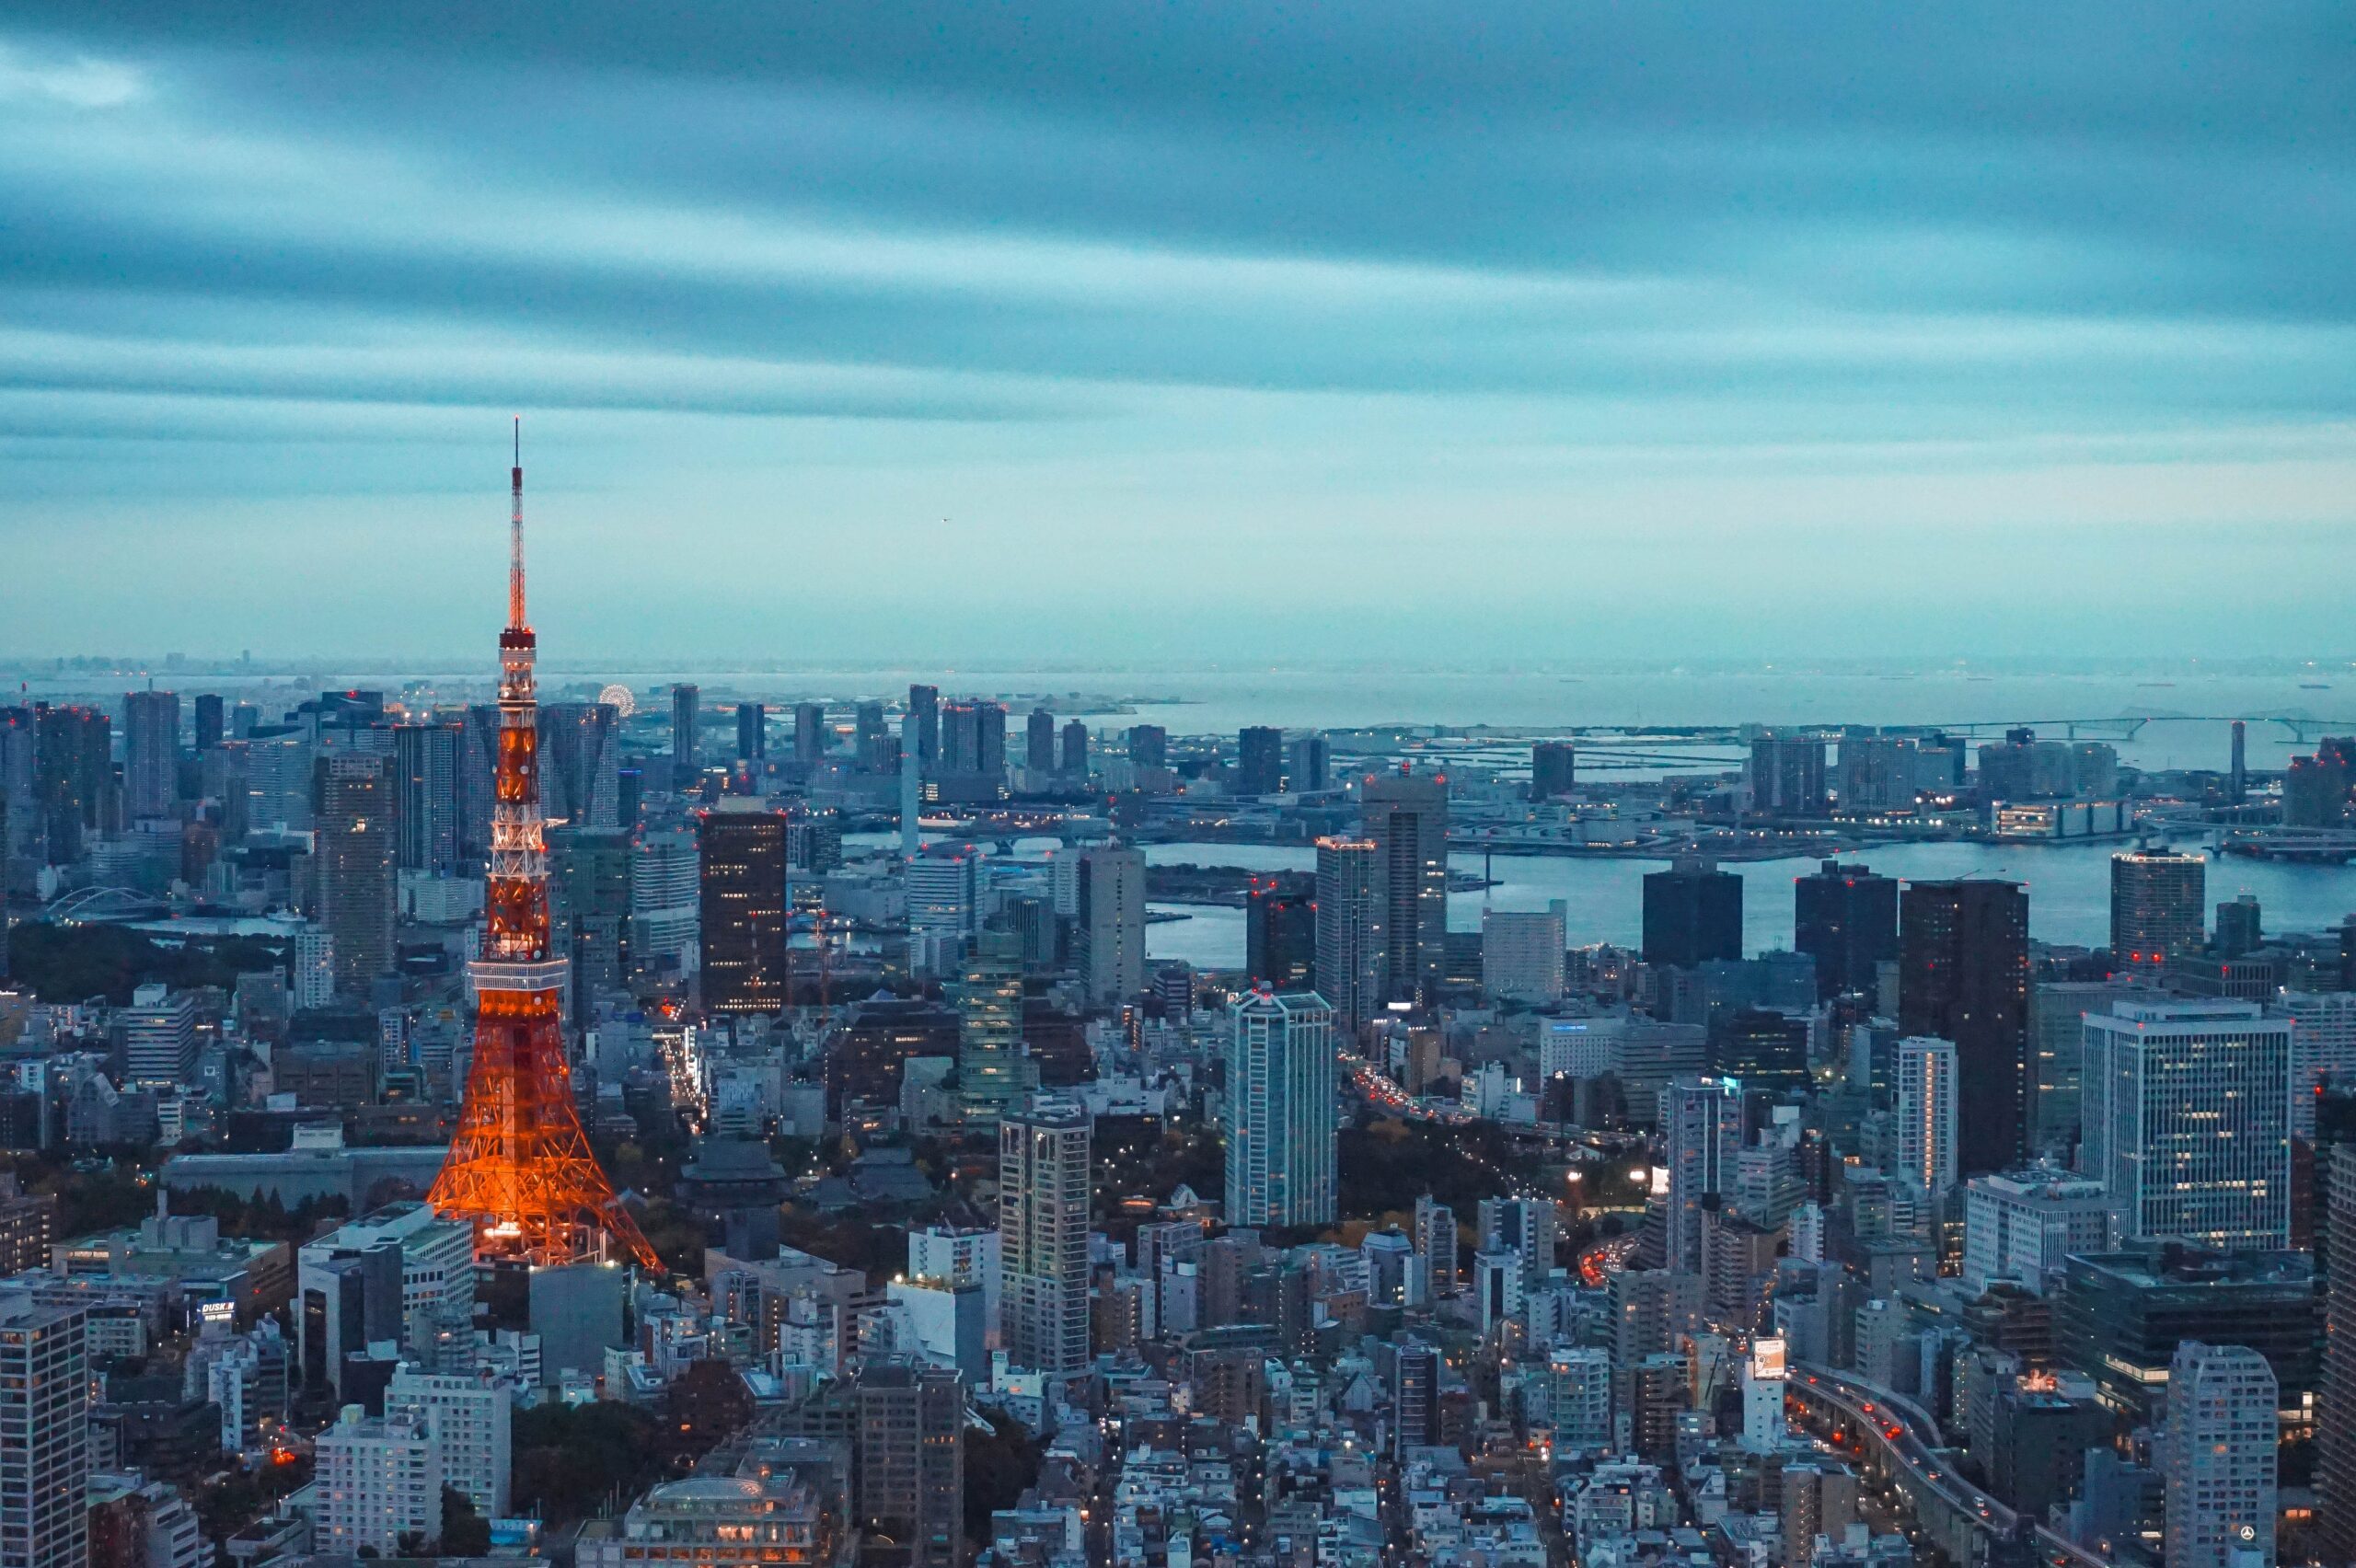 Tokyo Tower: A Majestic Symbol of Japan’s Capital City